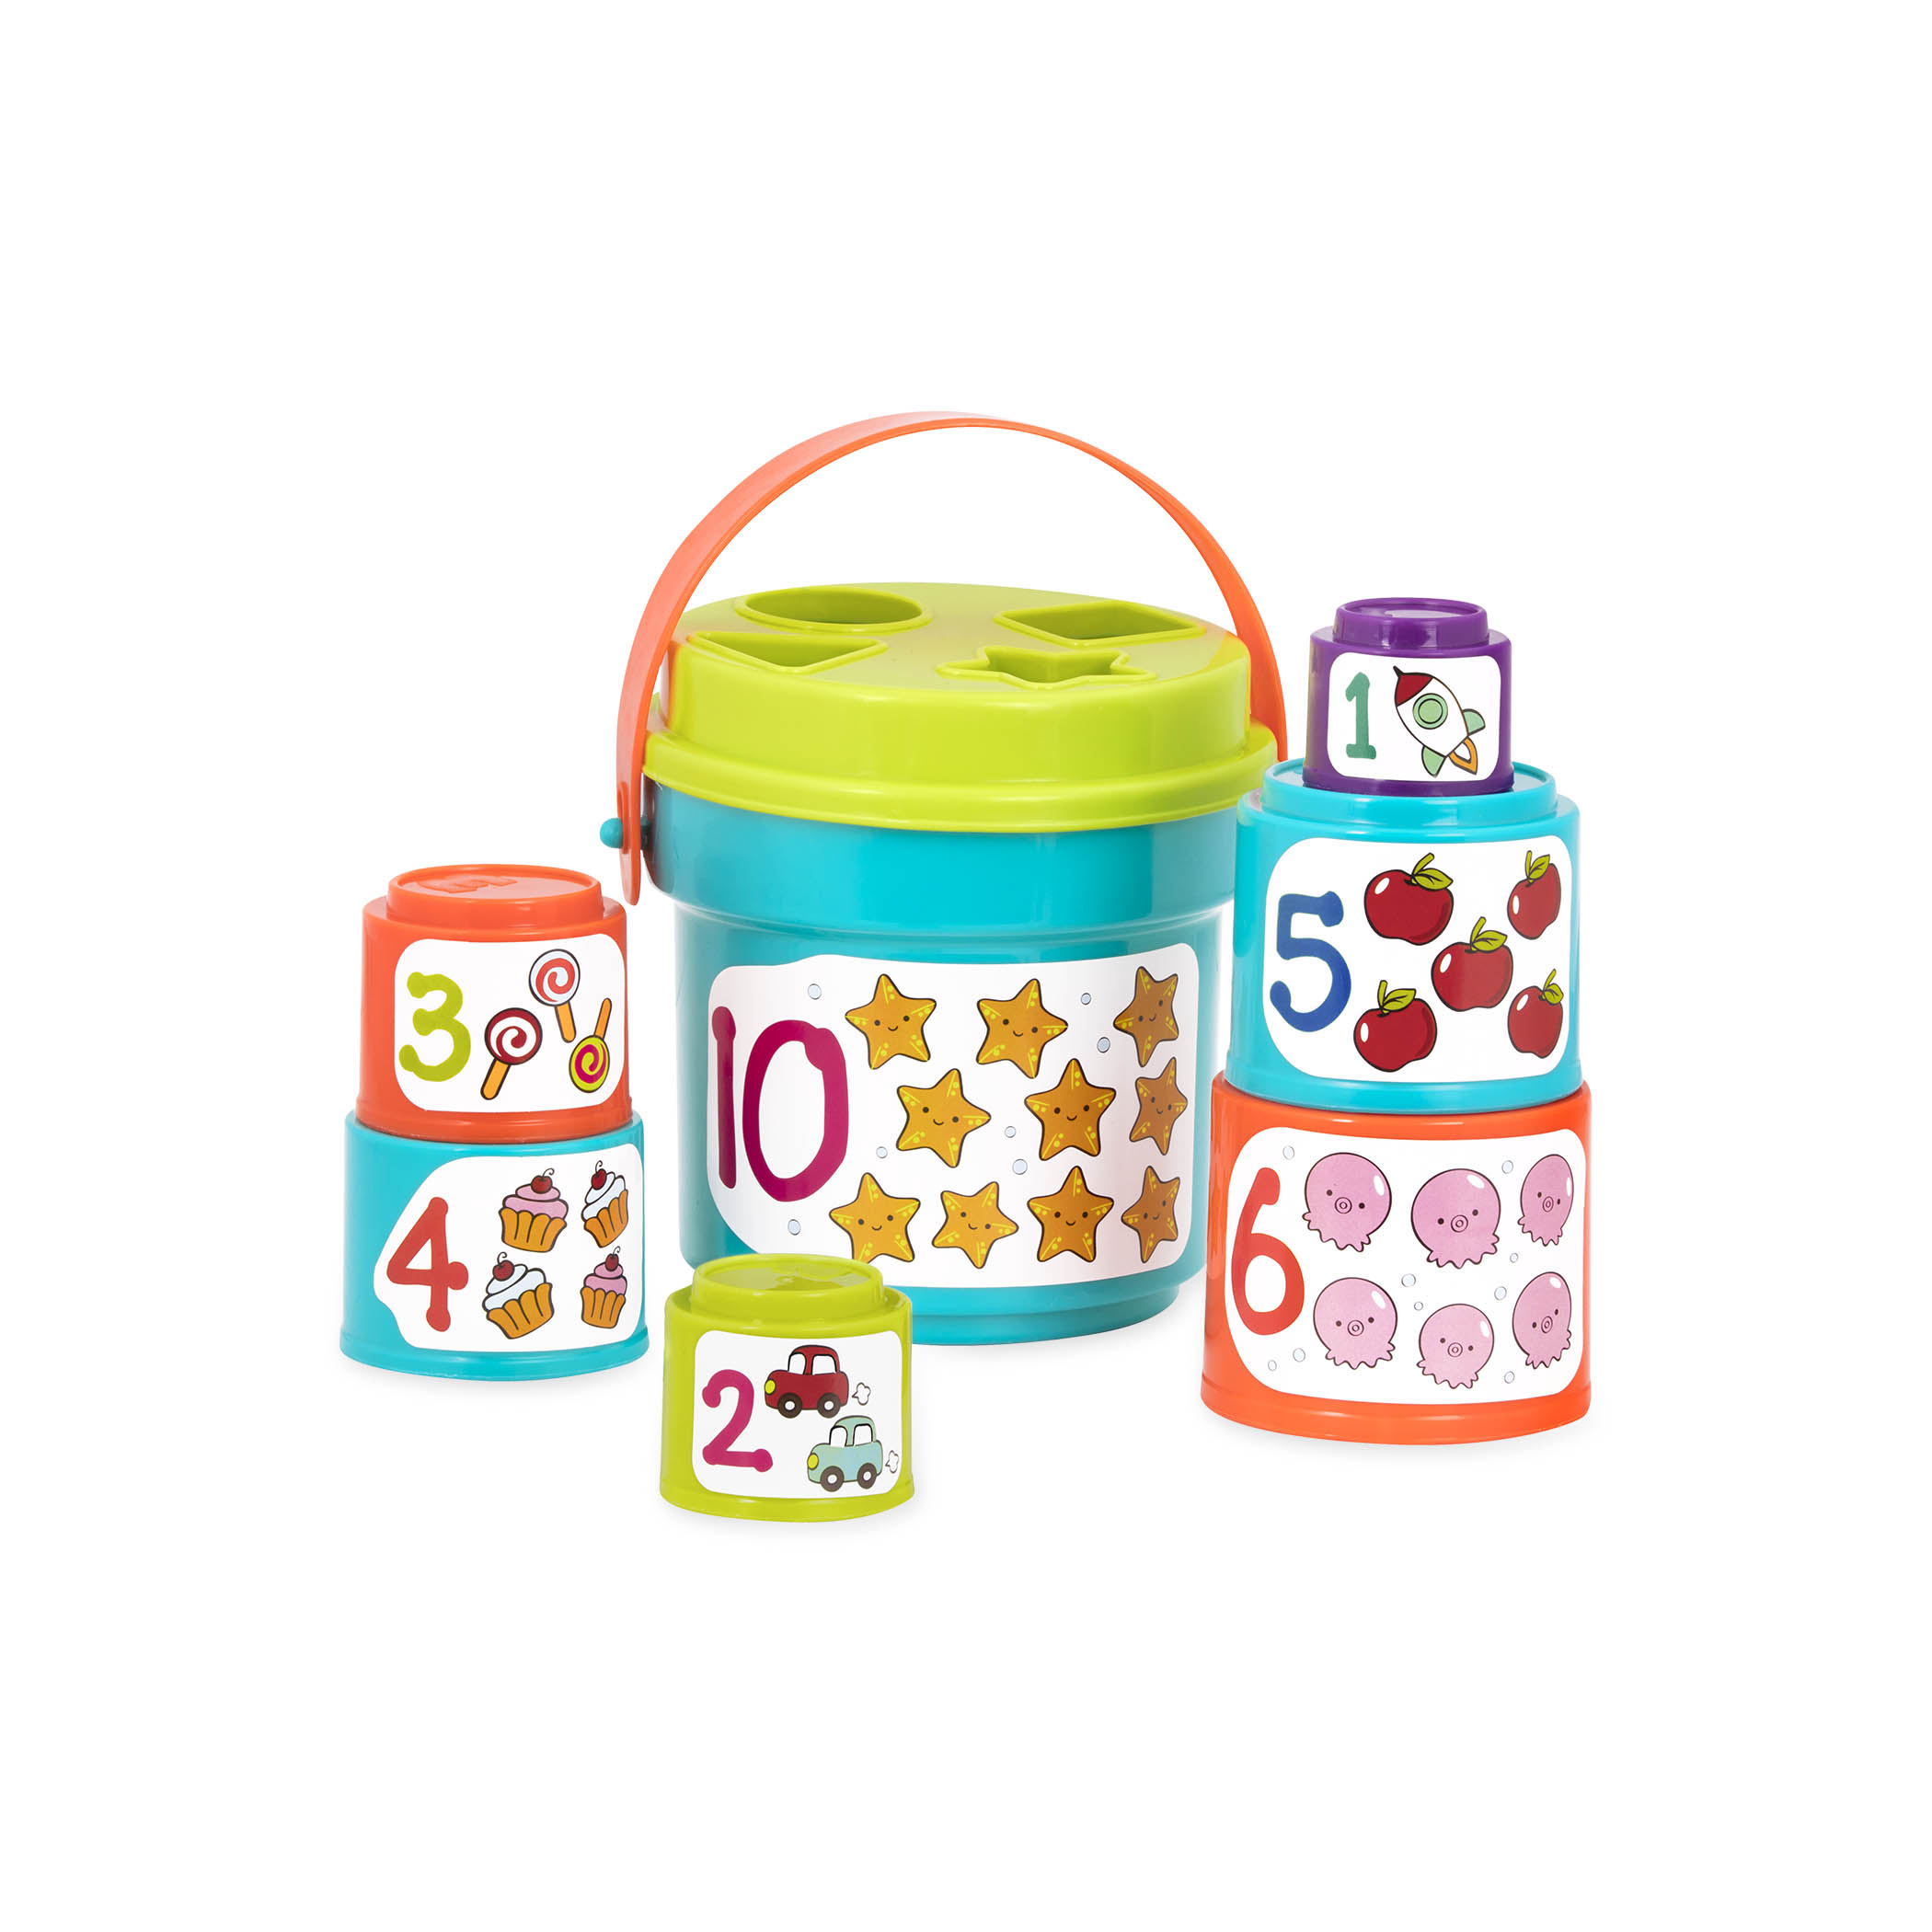 Battat Sort & Stack Educational Stacking Cups